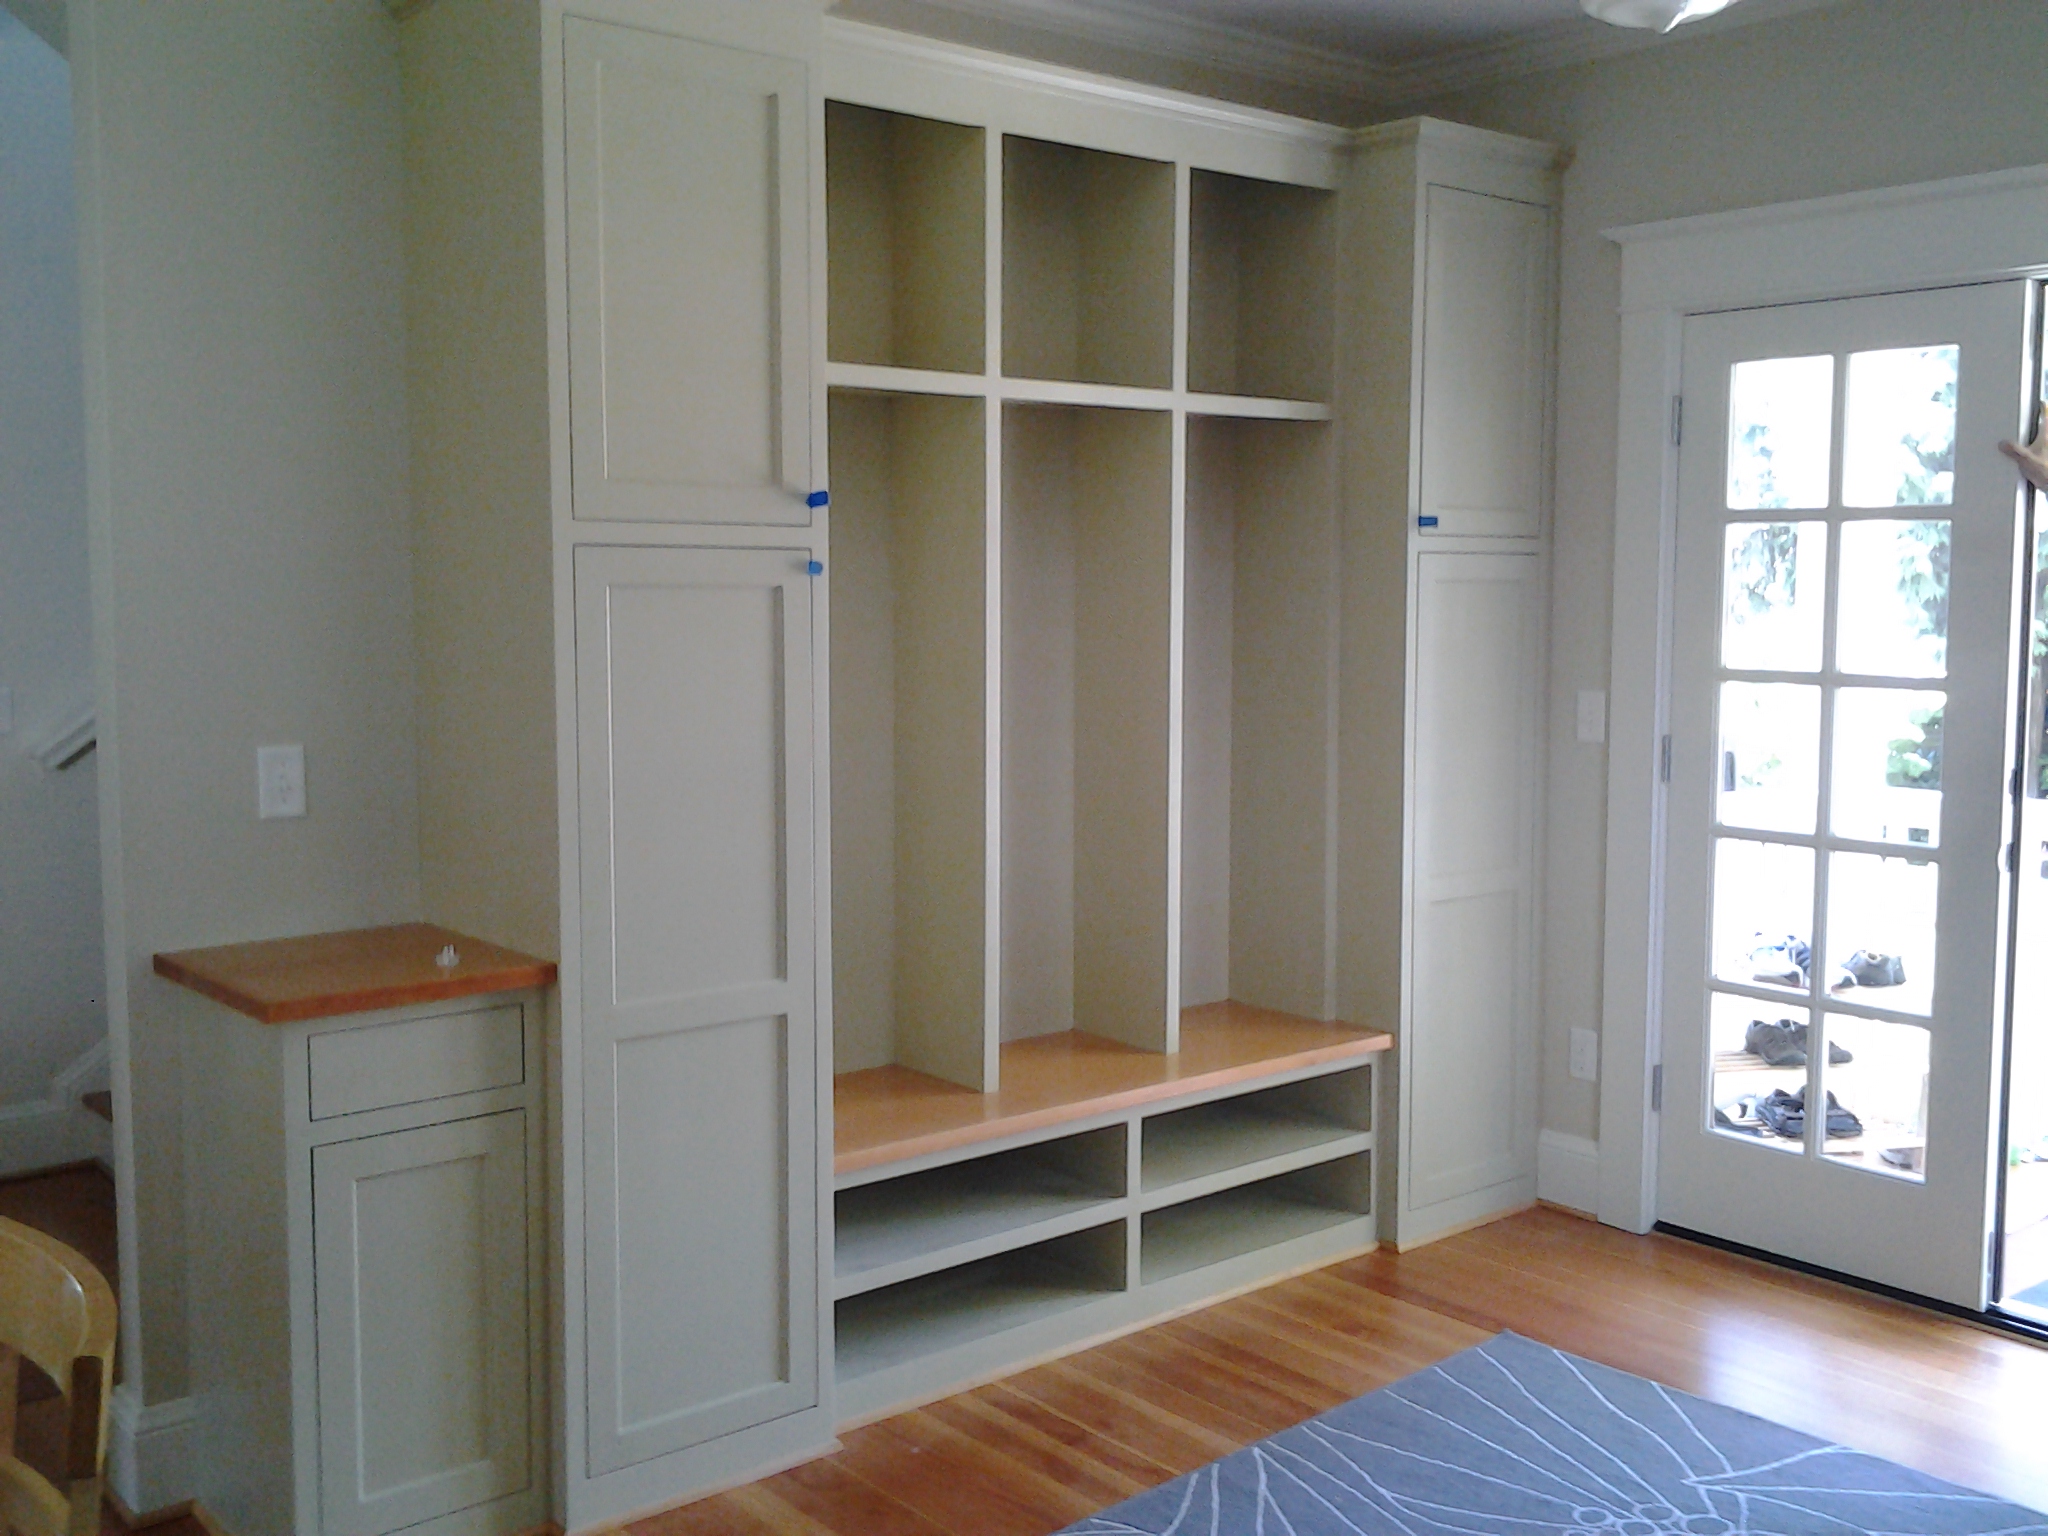 Mudroom Lockers with Bench Plans